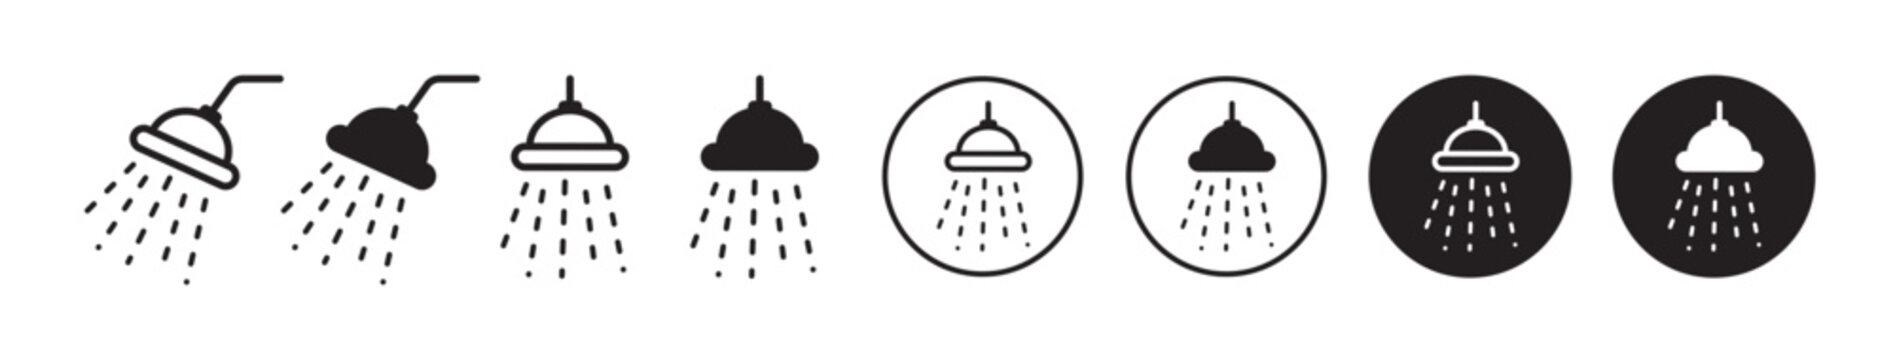 shower head vector icon set. bathroom bathing shower symbol in filled and outlined style in black color.